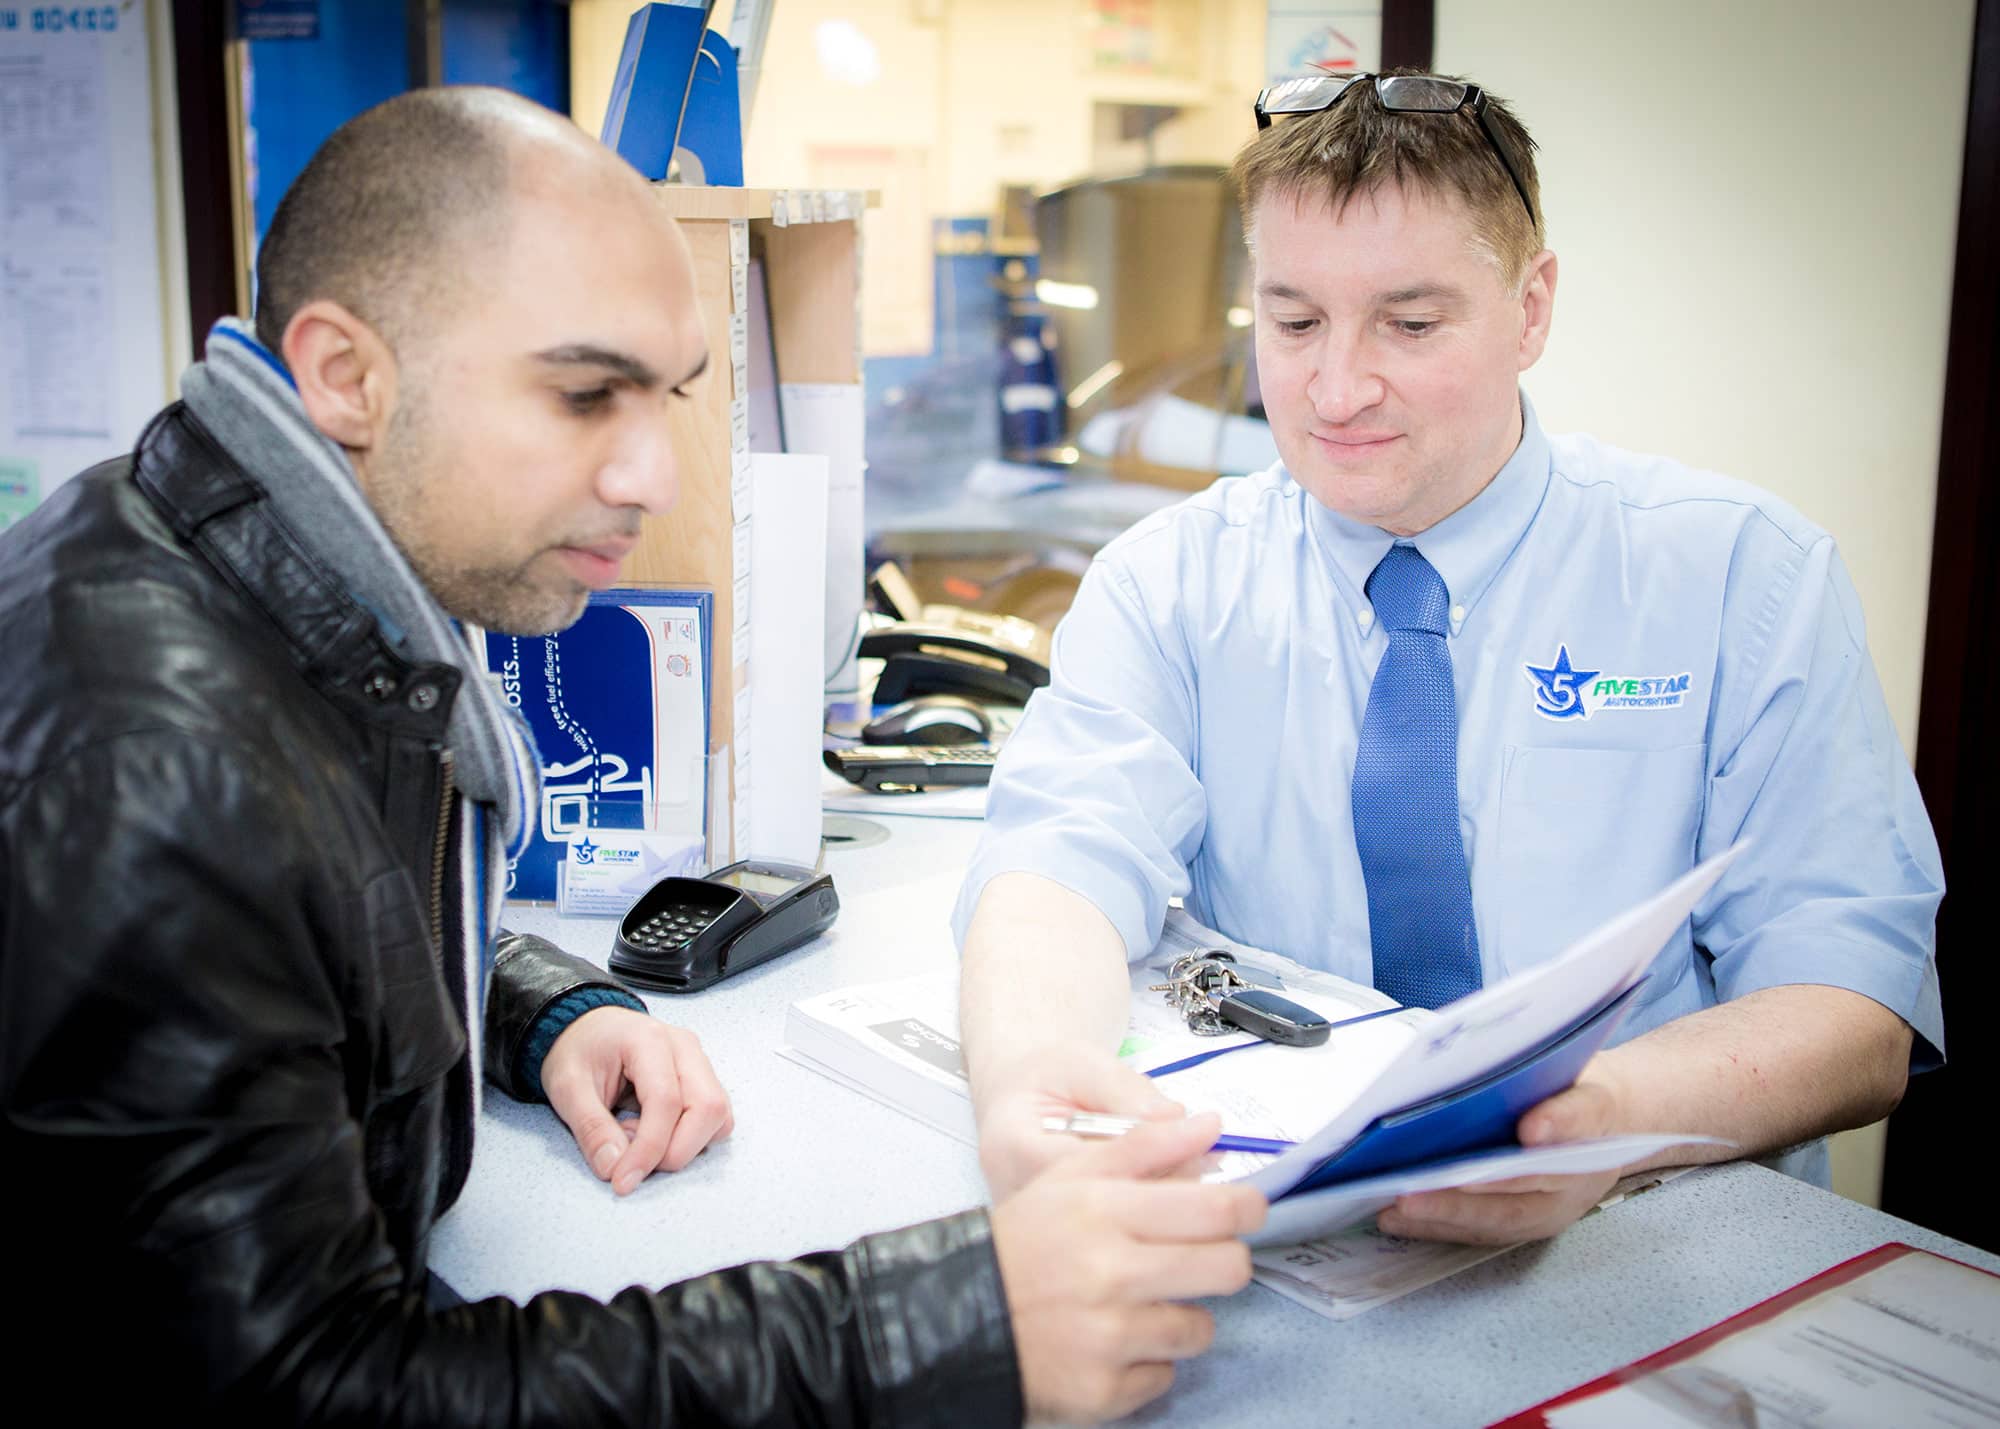 We pride ourselves on exceptional customer service at Five Star Autocentre